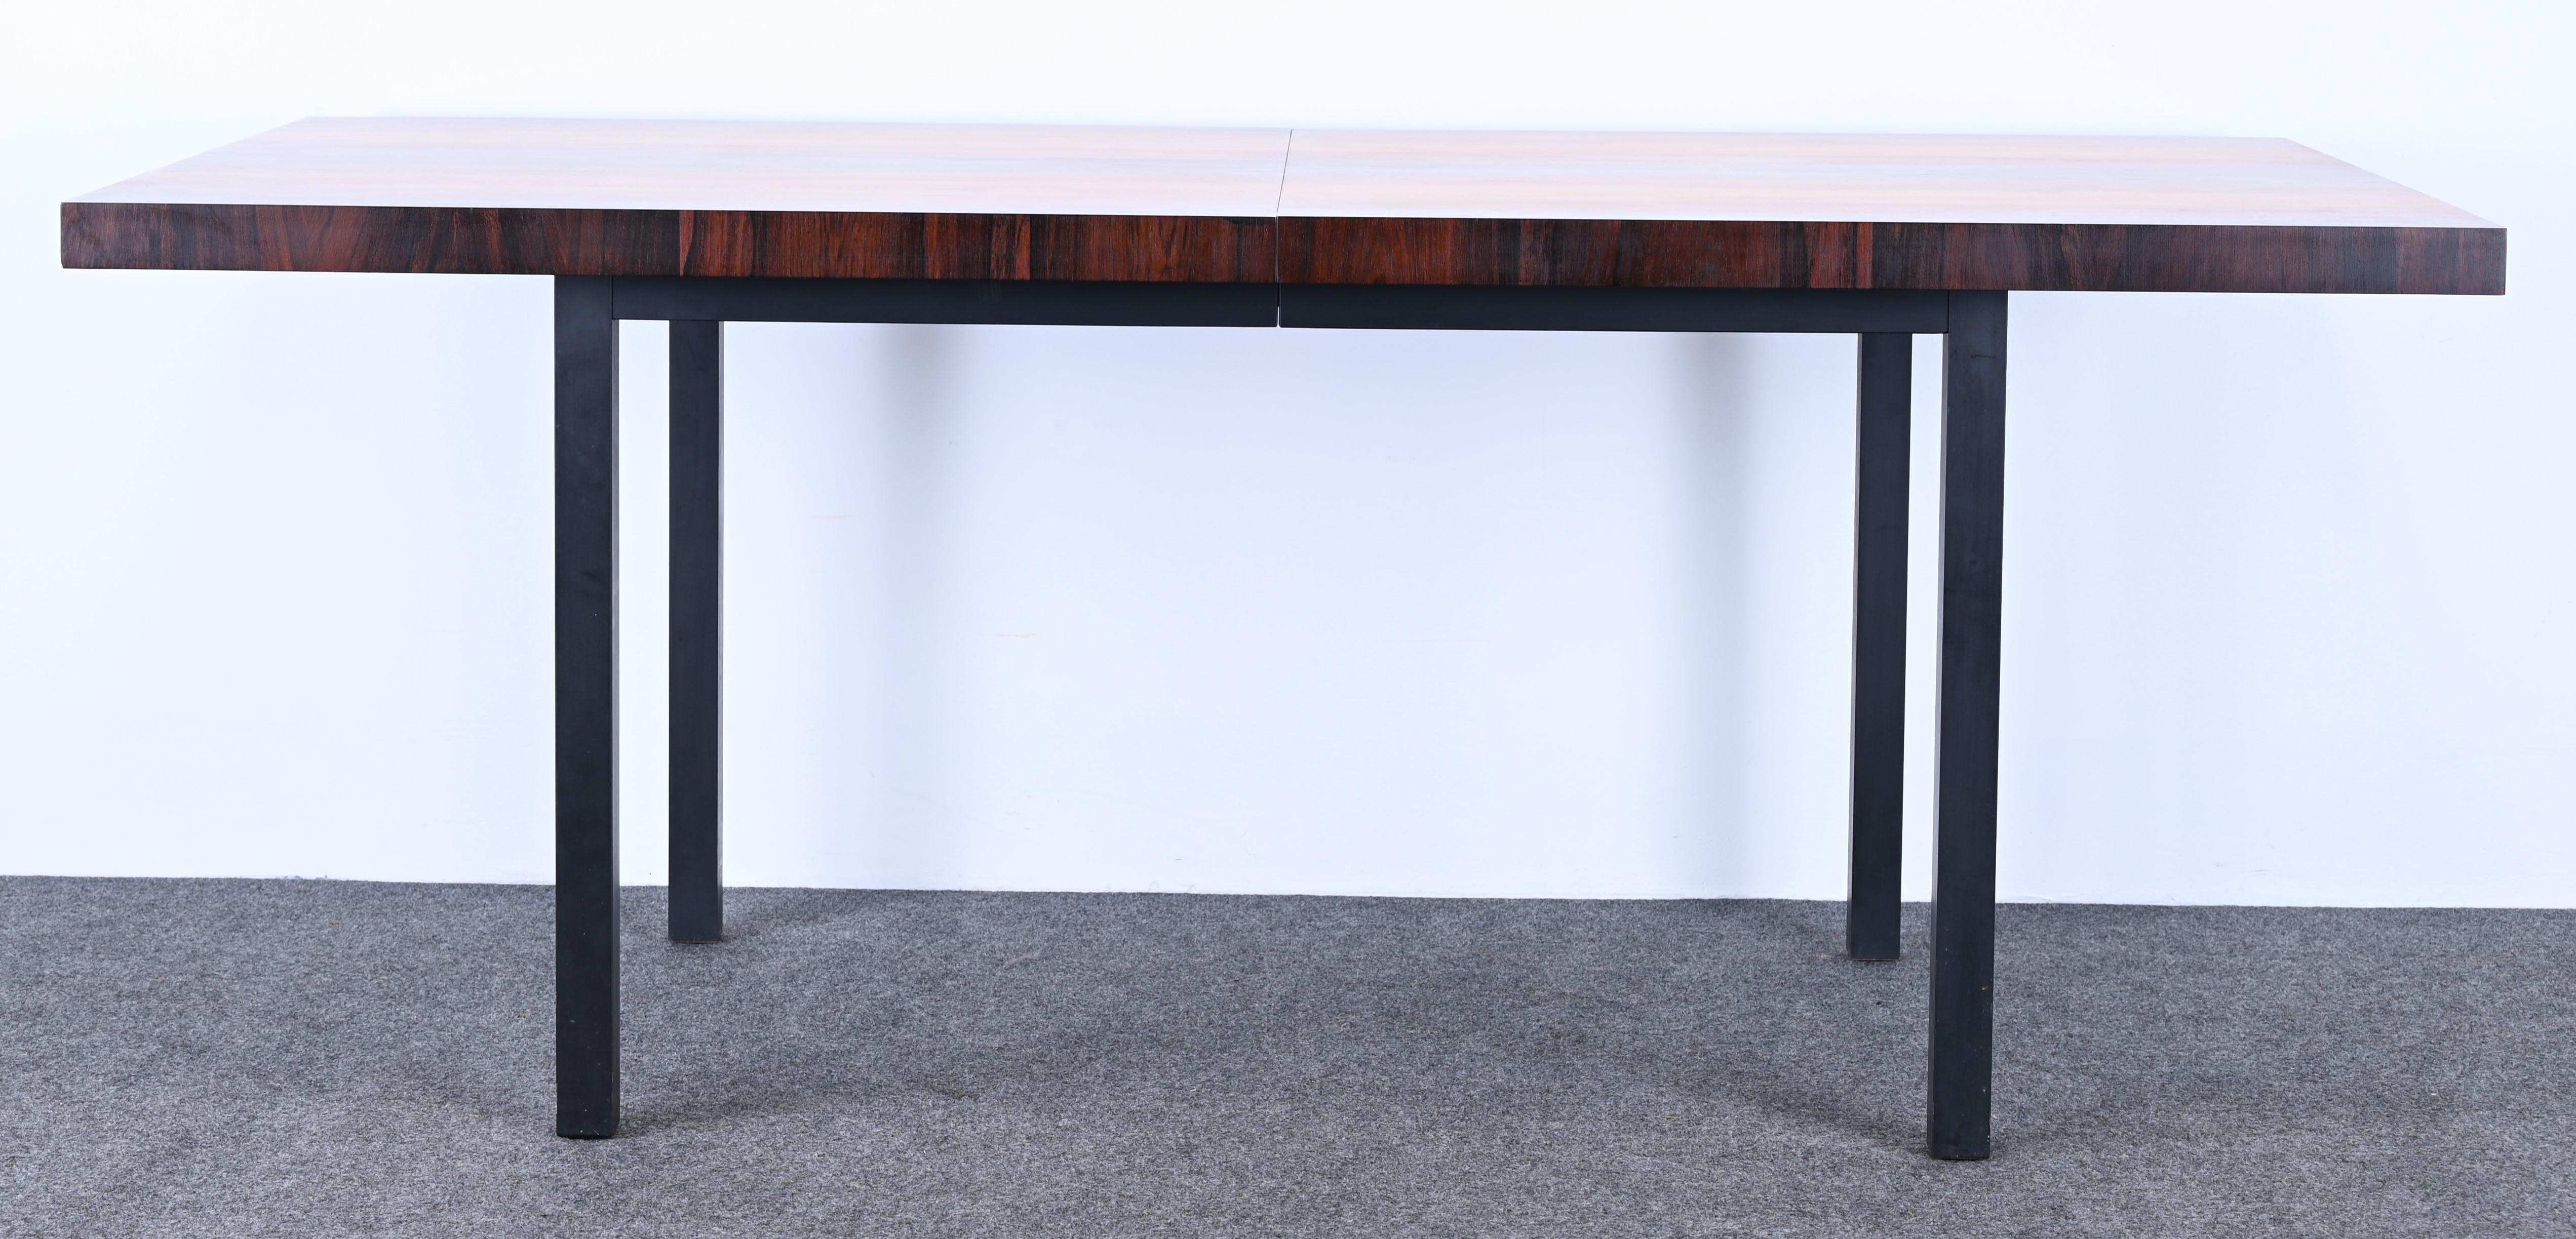 A beautiful Mid-Century Modern dining table designed by Milo Baughman for Directional. The table is made of gorgeous teak, rosewood, and walnut, has two leaves, and opens up to 112 inches long. Perfect for family gatherings and holidays. Some minor